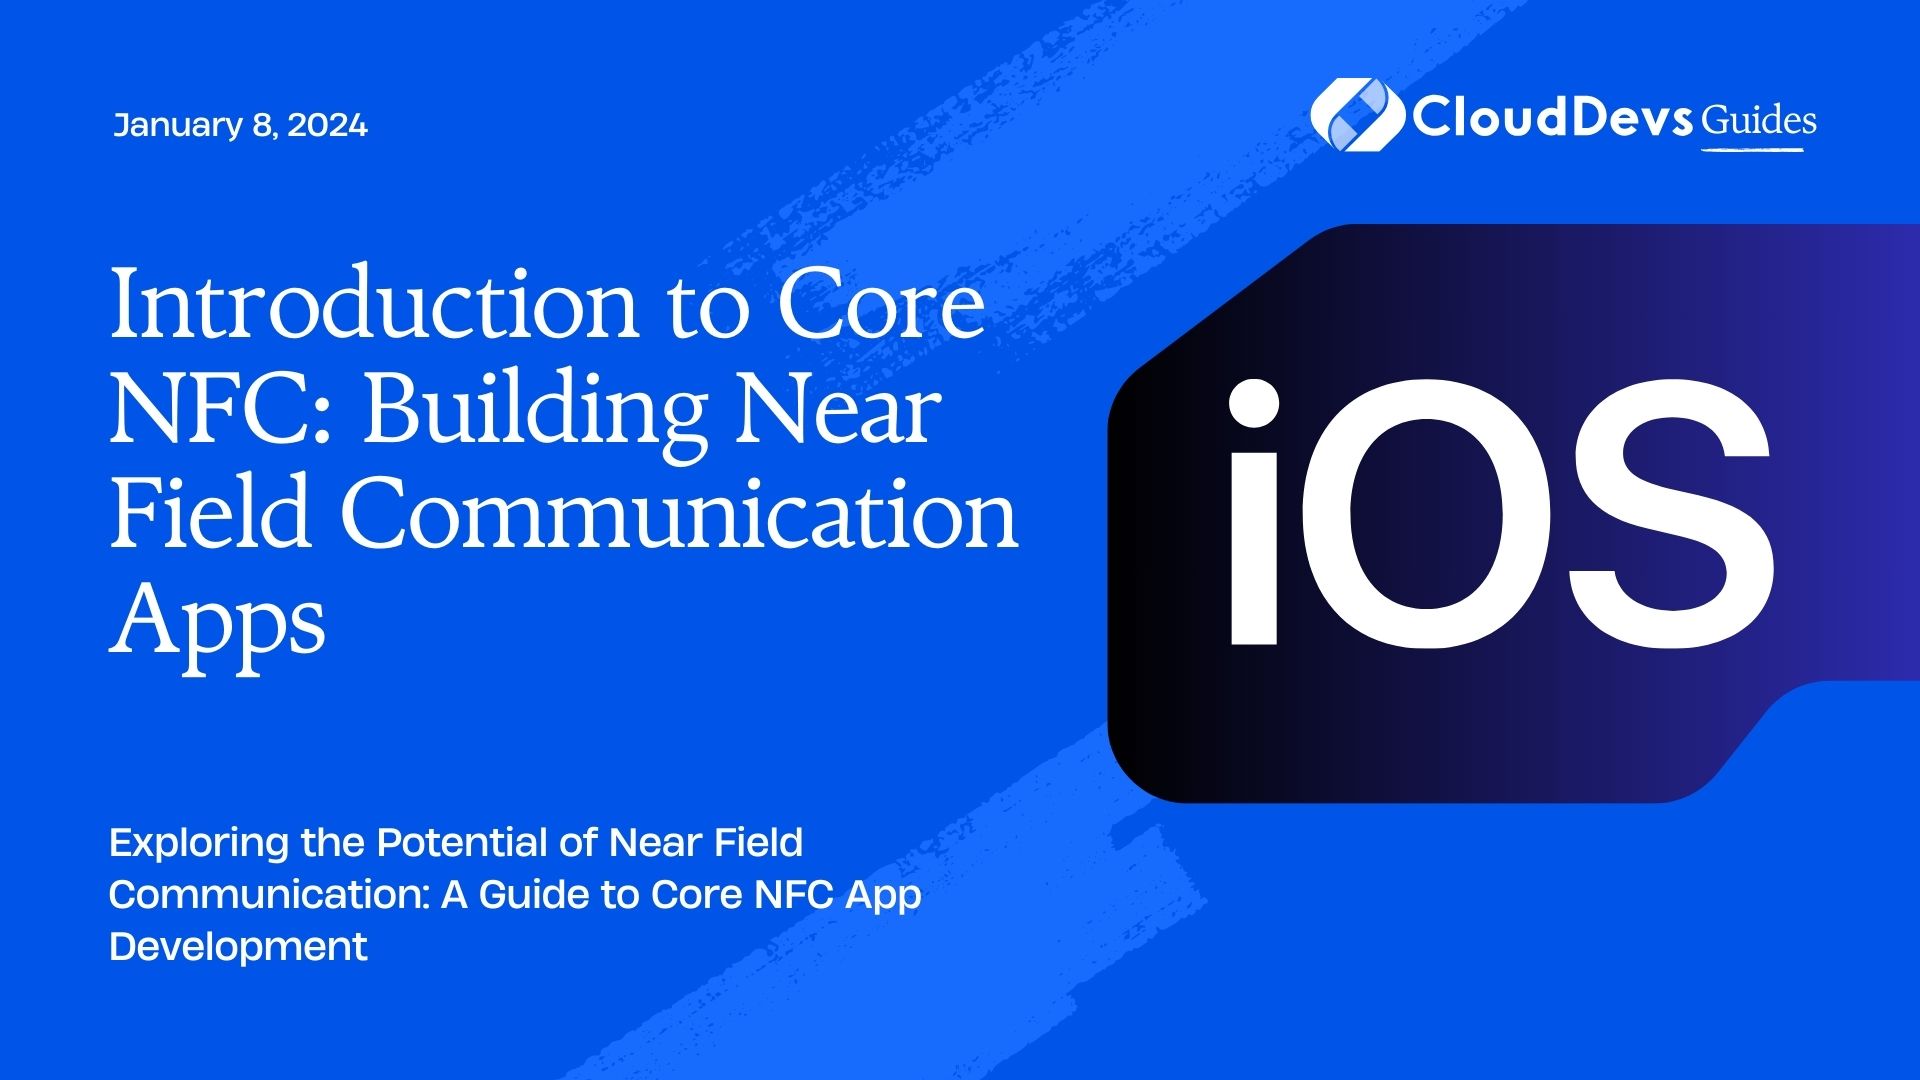 Introduction to Core NFC: Building Near Field Communication Apps